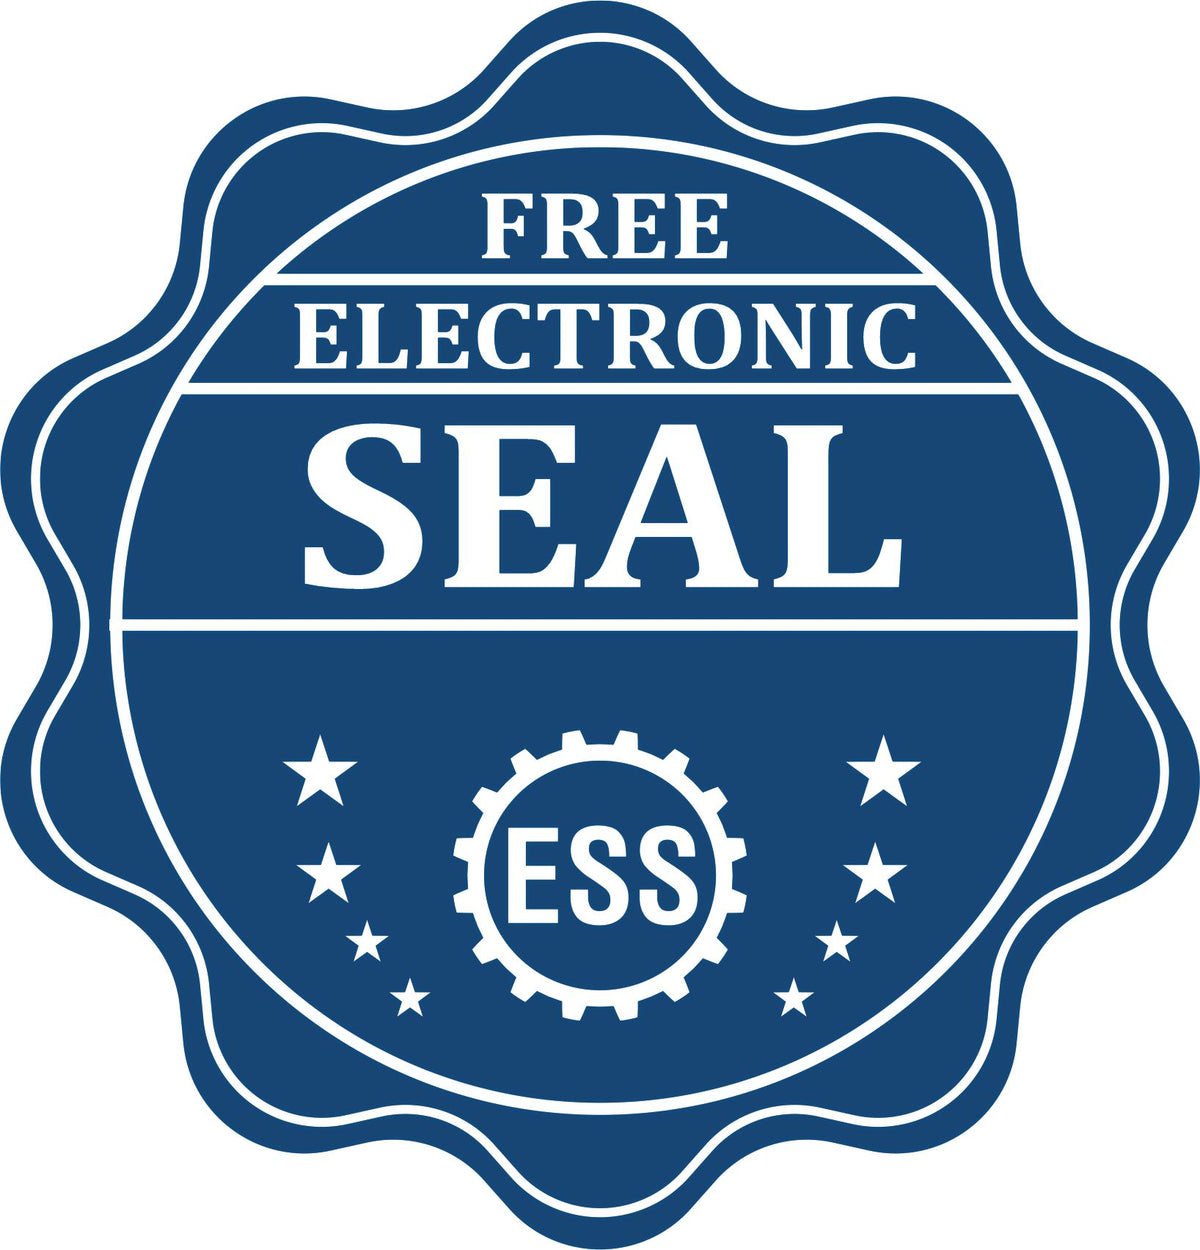 A badge showing a free electronic seal for the Long Reach Oklahoma PE Seal with stars and the ESS gear on the emblem.